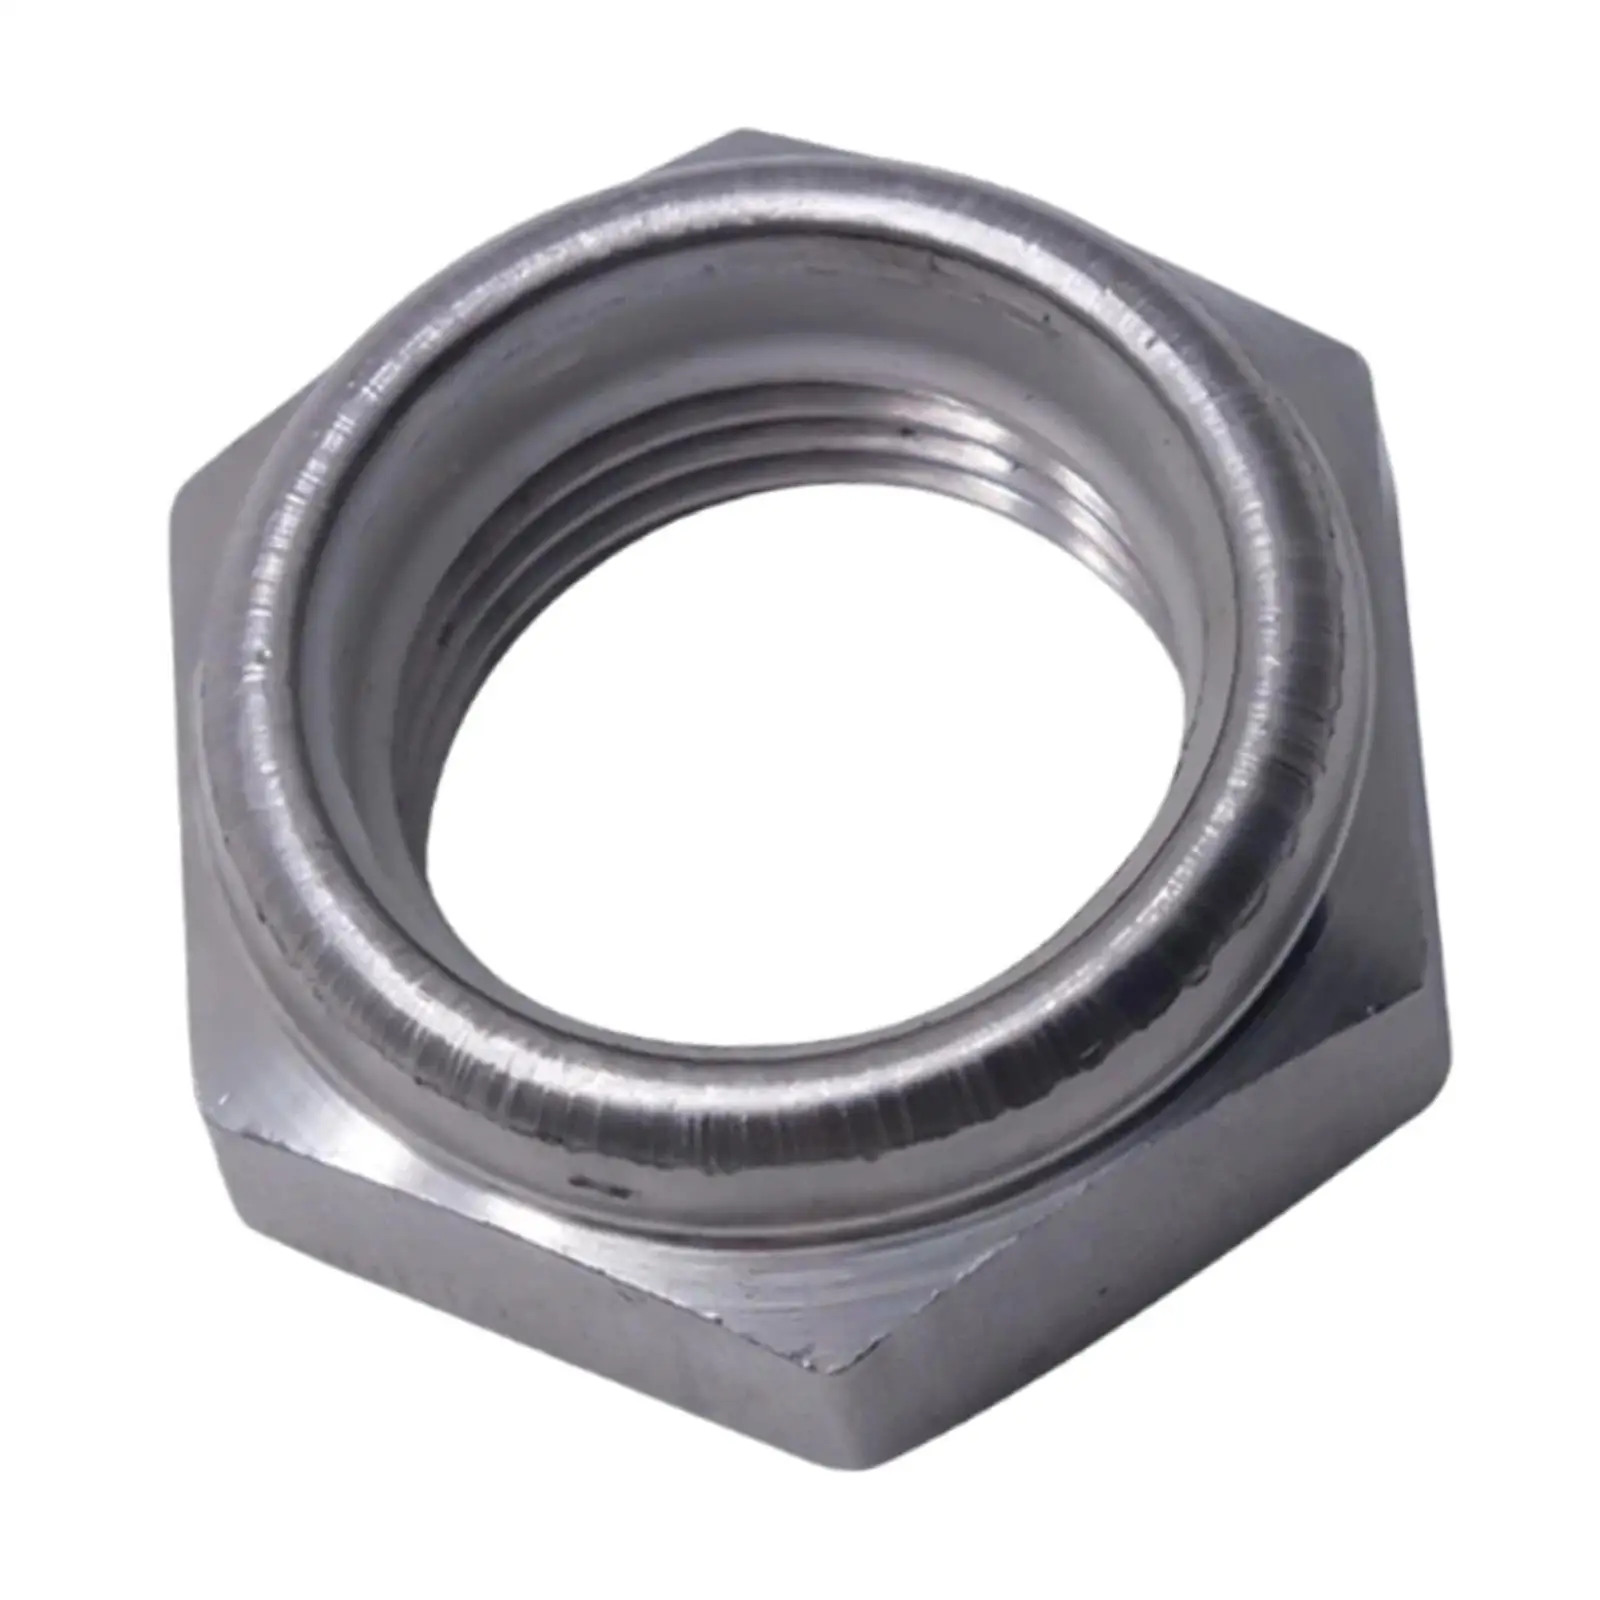 Replacement Self Locking Nut 90185-22043 90185-22043-00 Hex Locknut Replace for Hanghkai Easily Install Vehicle Spare Parts